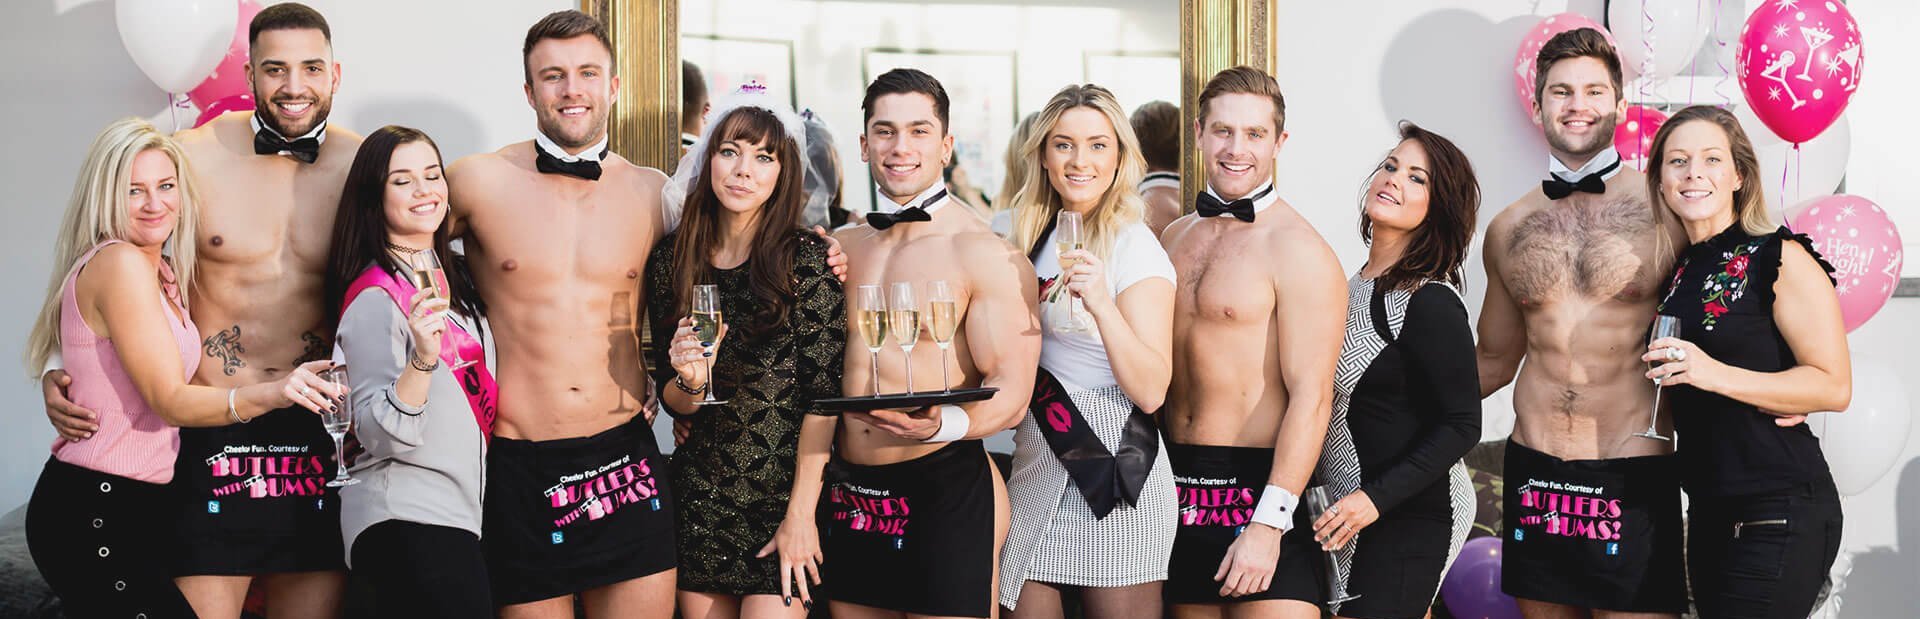 Buff Butlers with hen party guests